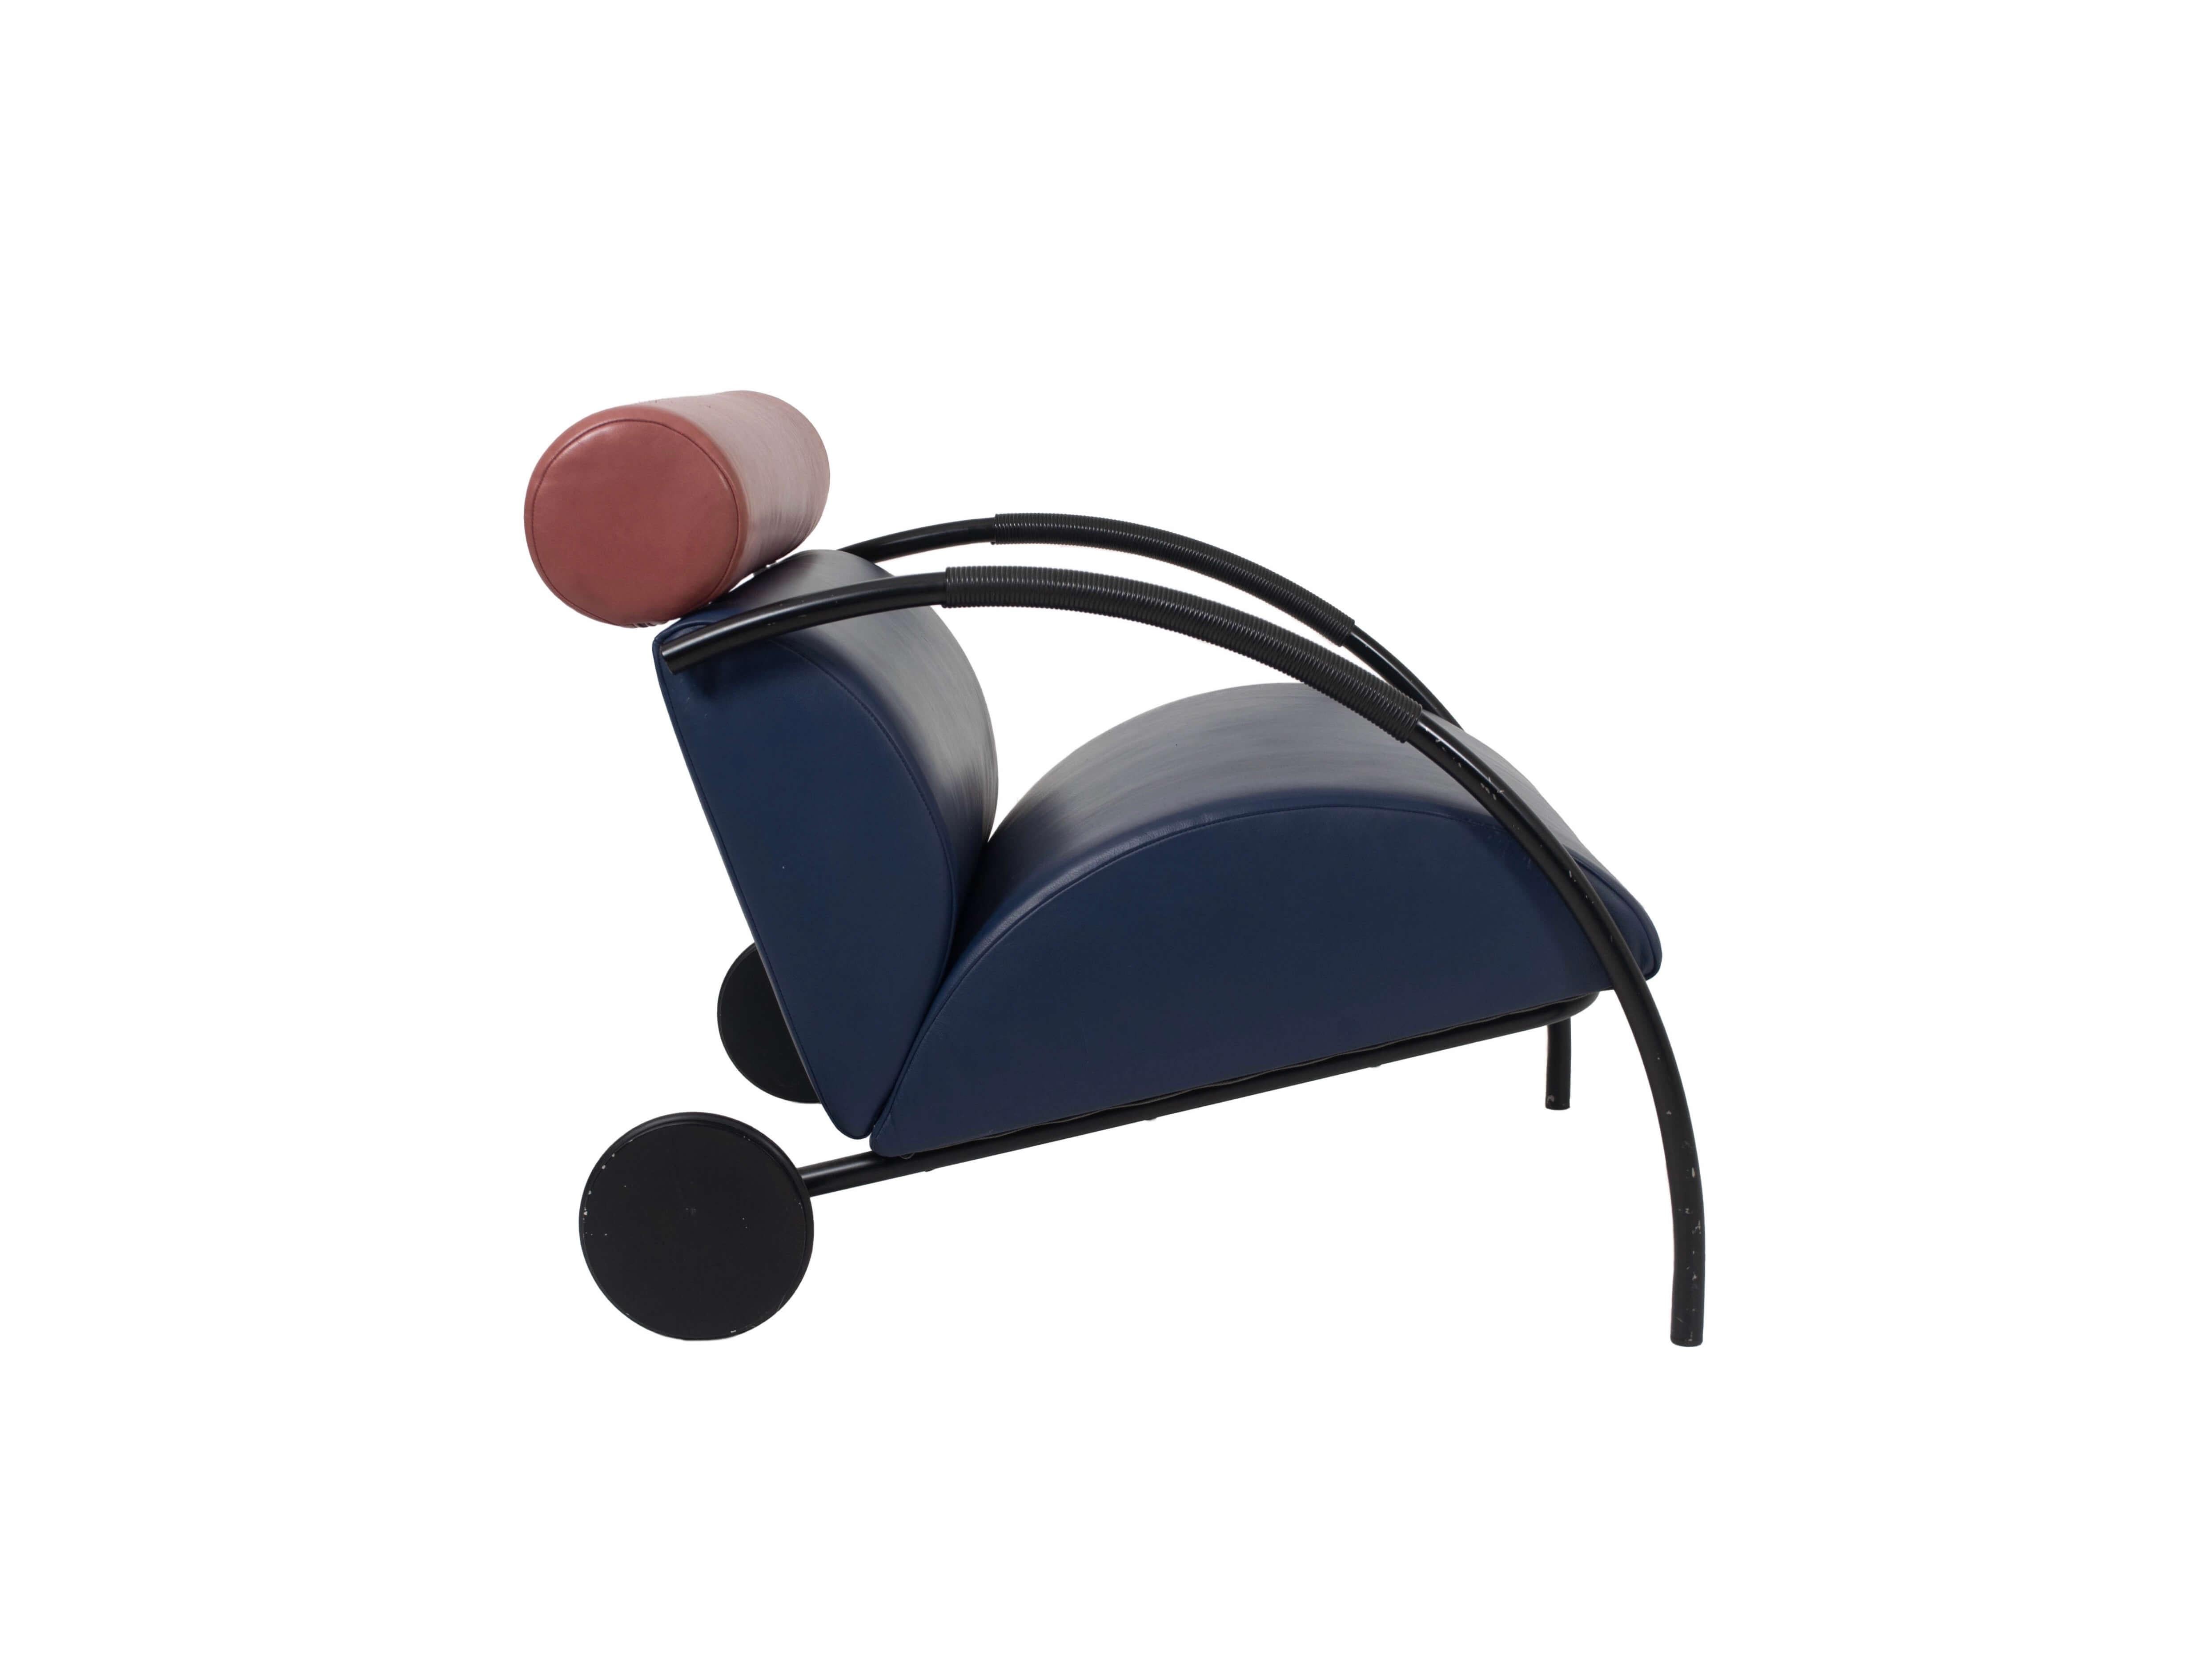 Postmodern Pop Art 'Zyklus Chair' by Peter Maly for Cor, Germany 1980s. This leather lounge chair has a great design and is very comfortable. The base consists of a tube steel frame with armrests wrapped in black strings. The adjustable neck roll in